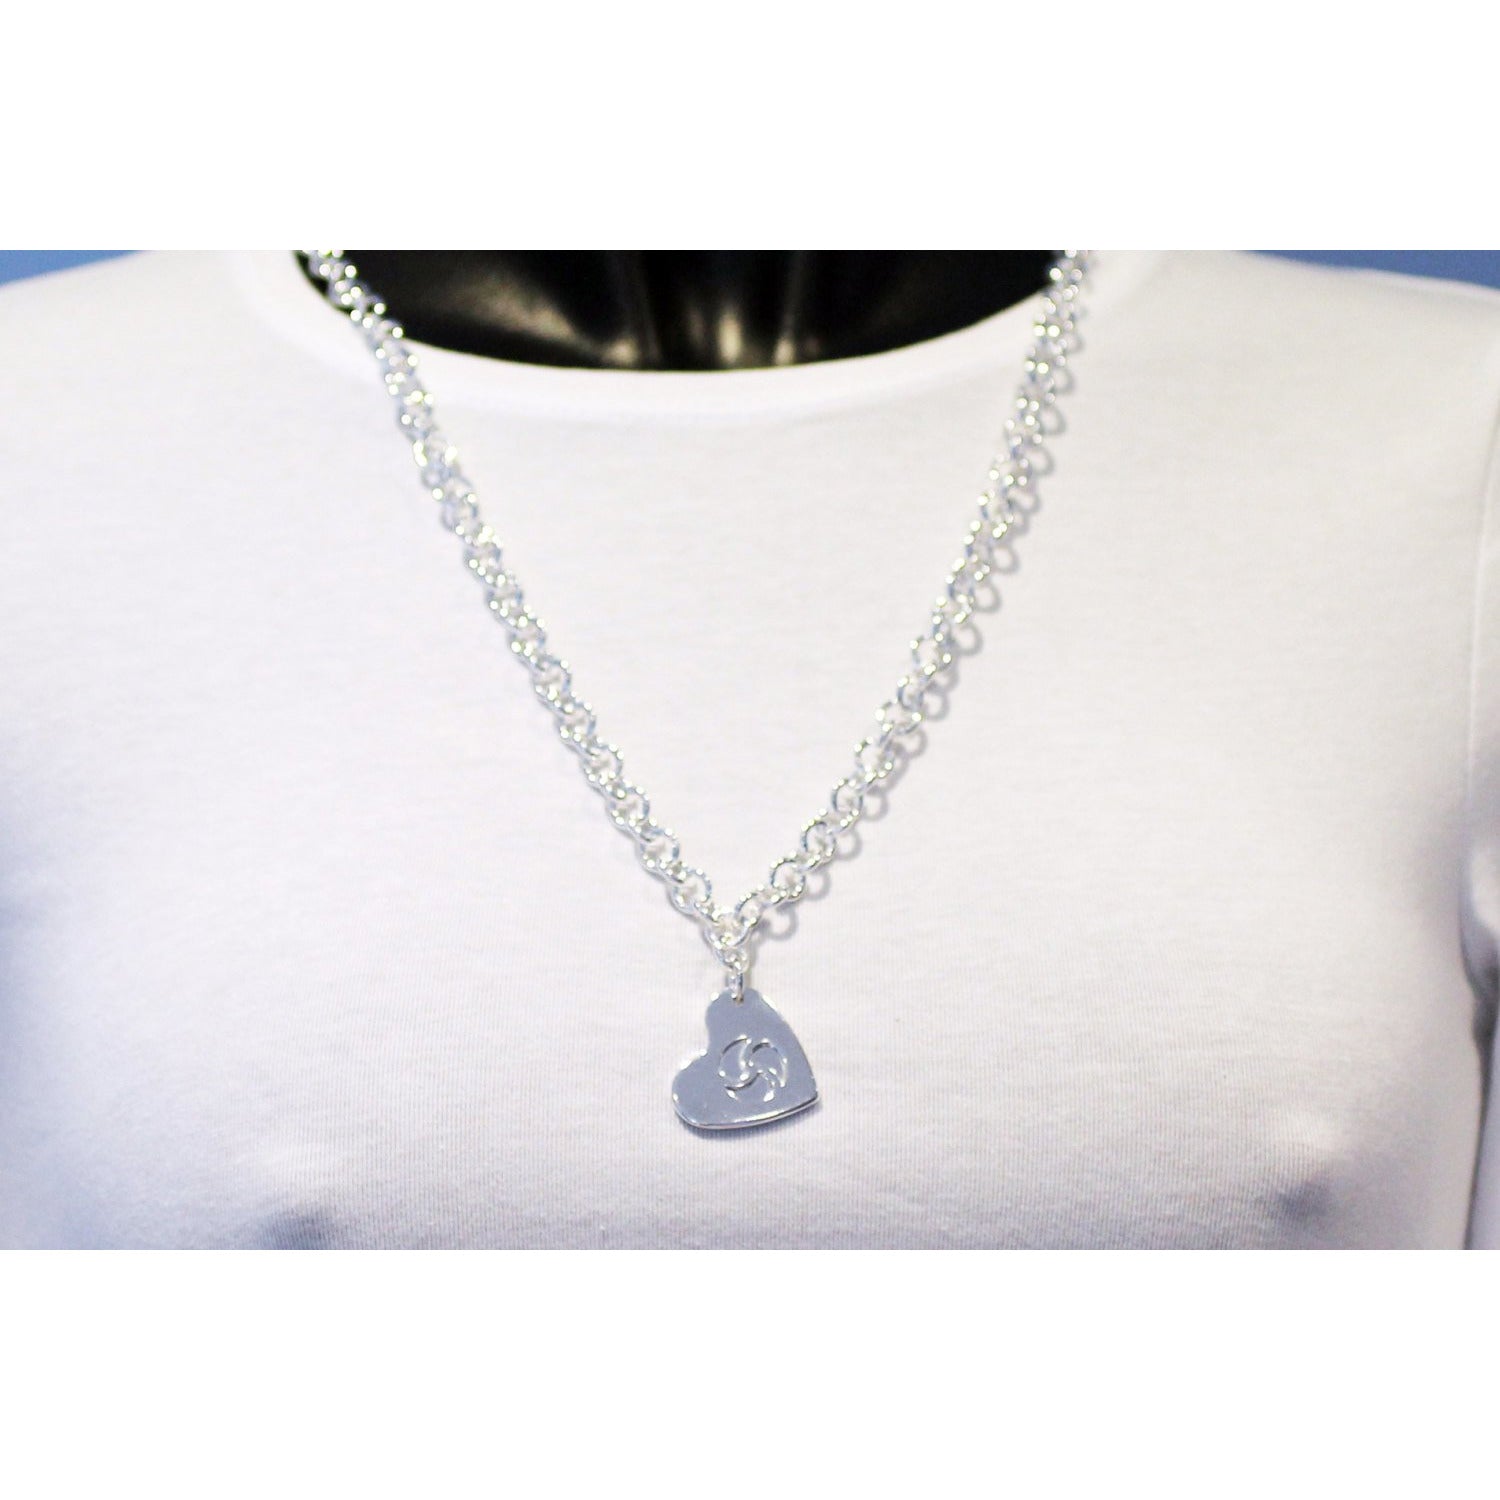 Sterling Silver BDSM Heart, Hidden Triskelion pendant, Day Collar, Heavy Chain Collar Choker Necklace  Made to order